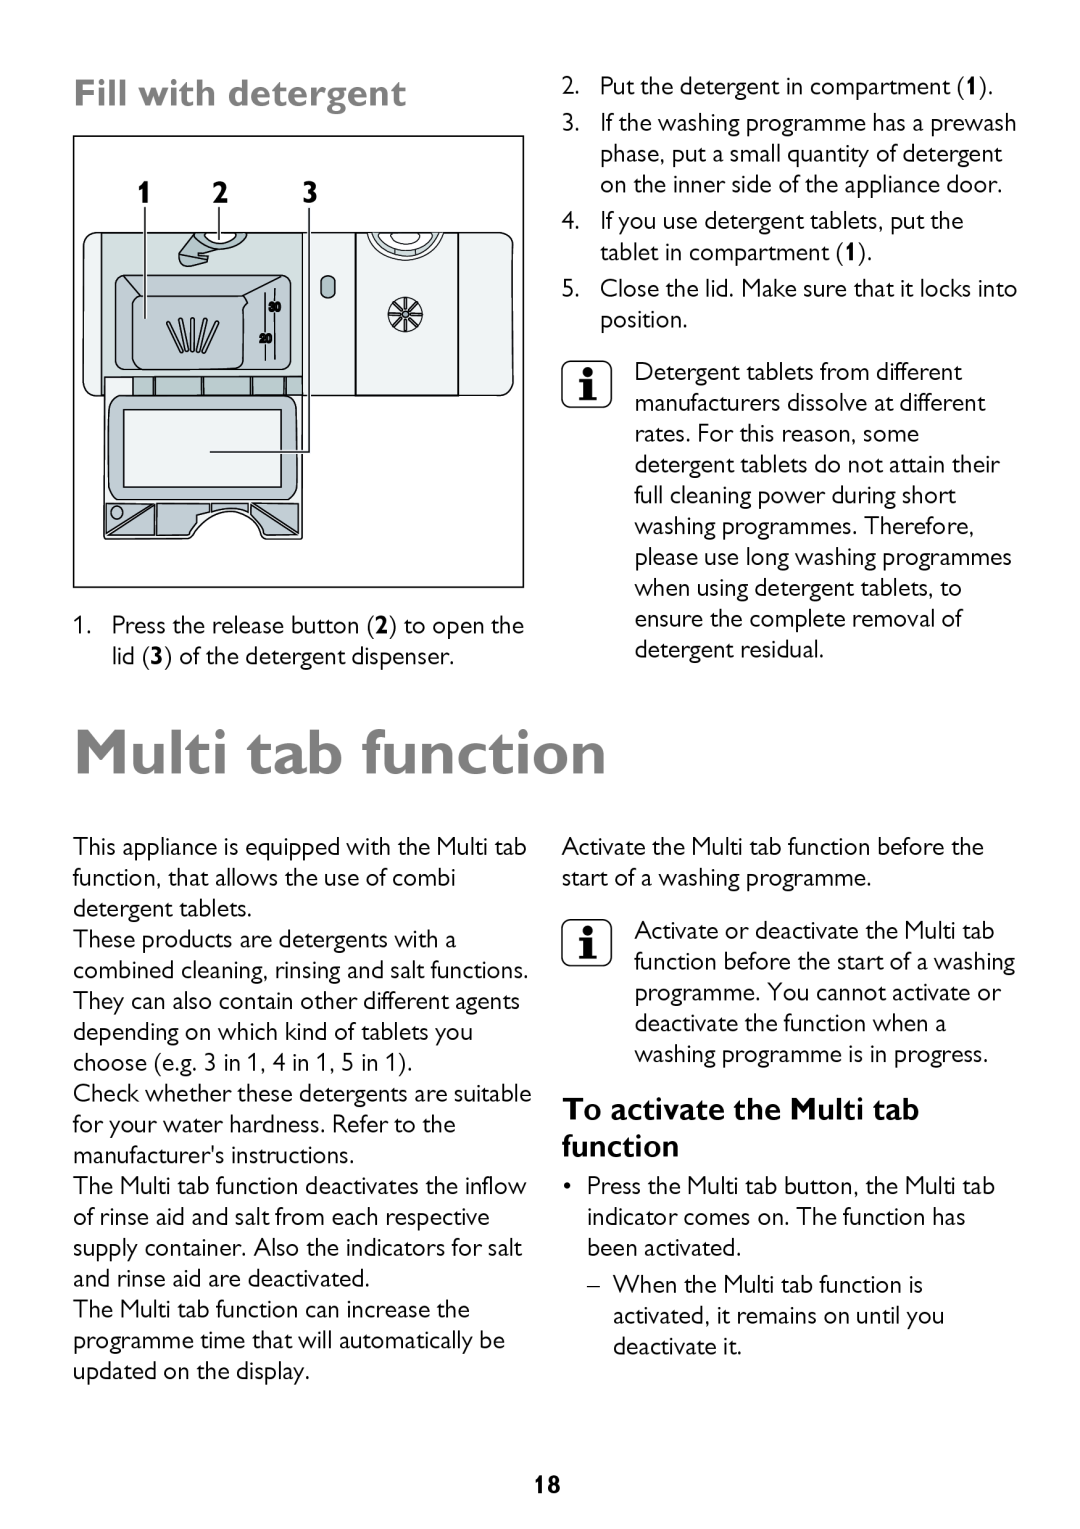 John Lewis JLDW 1221 instruction manual Fill with detergent, To activate the Multi tab function 